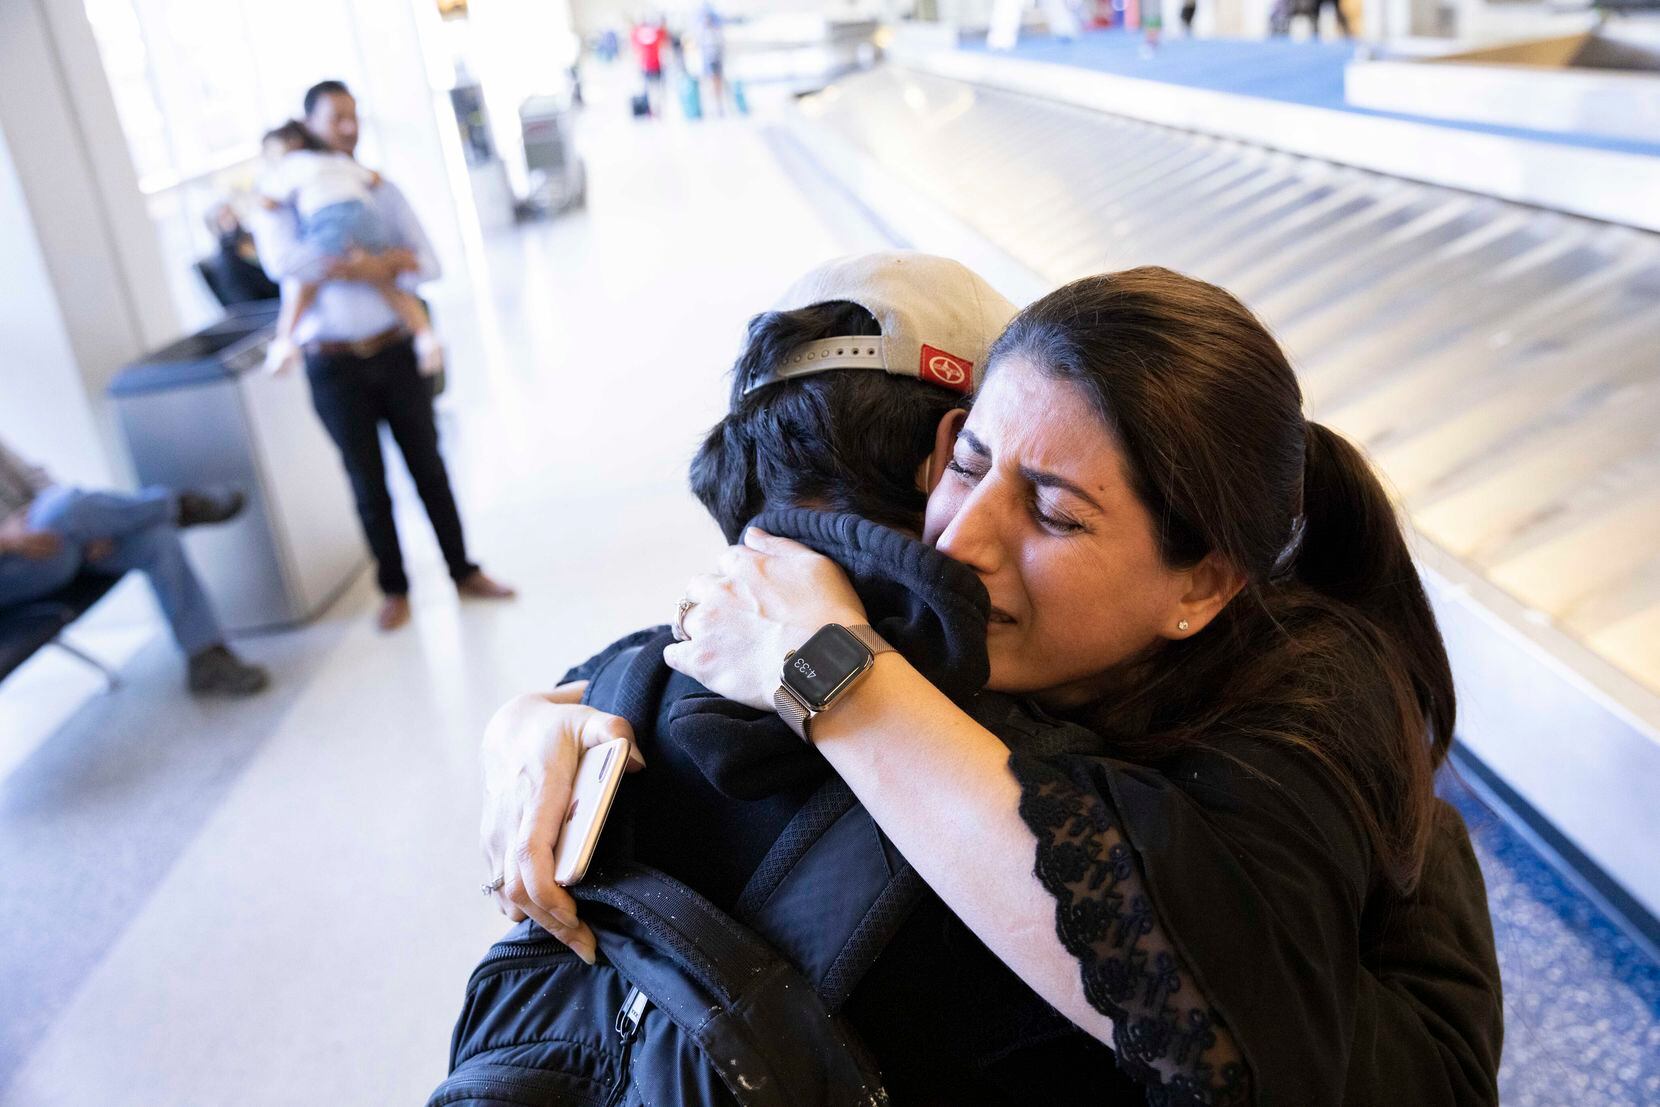 Atefa Sharifi (right) hugged her son Saeed Sharifi, 15, after being reunited on Tuesday at DFW International Airport. Saeed flew from Fort Bliss, where he stayed after arriving from Afghanistan. 